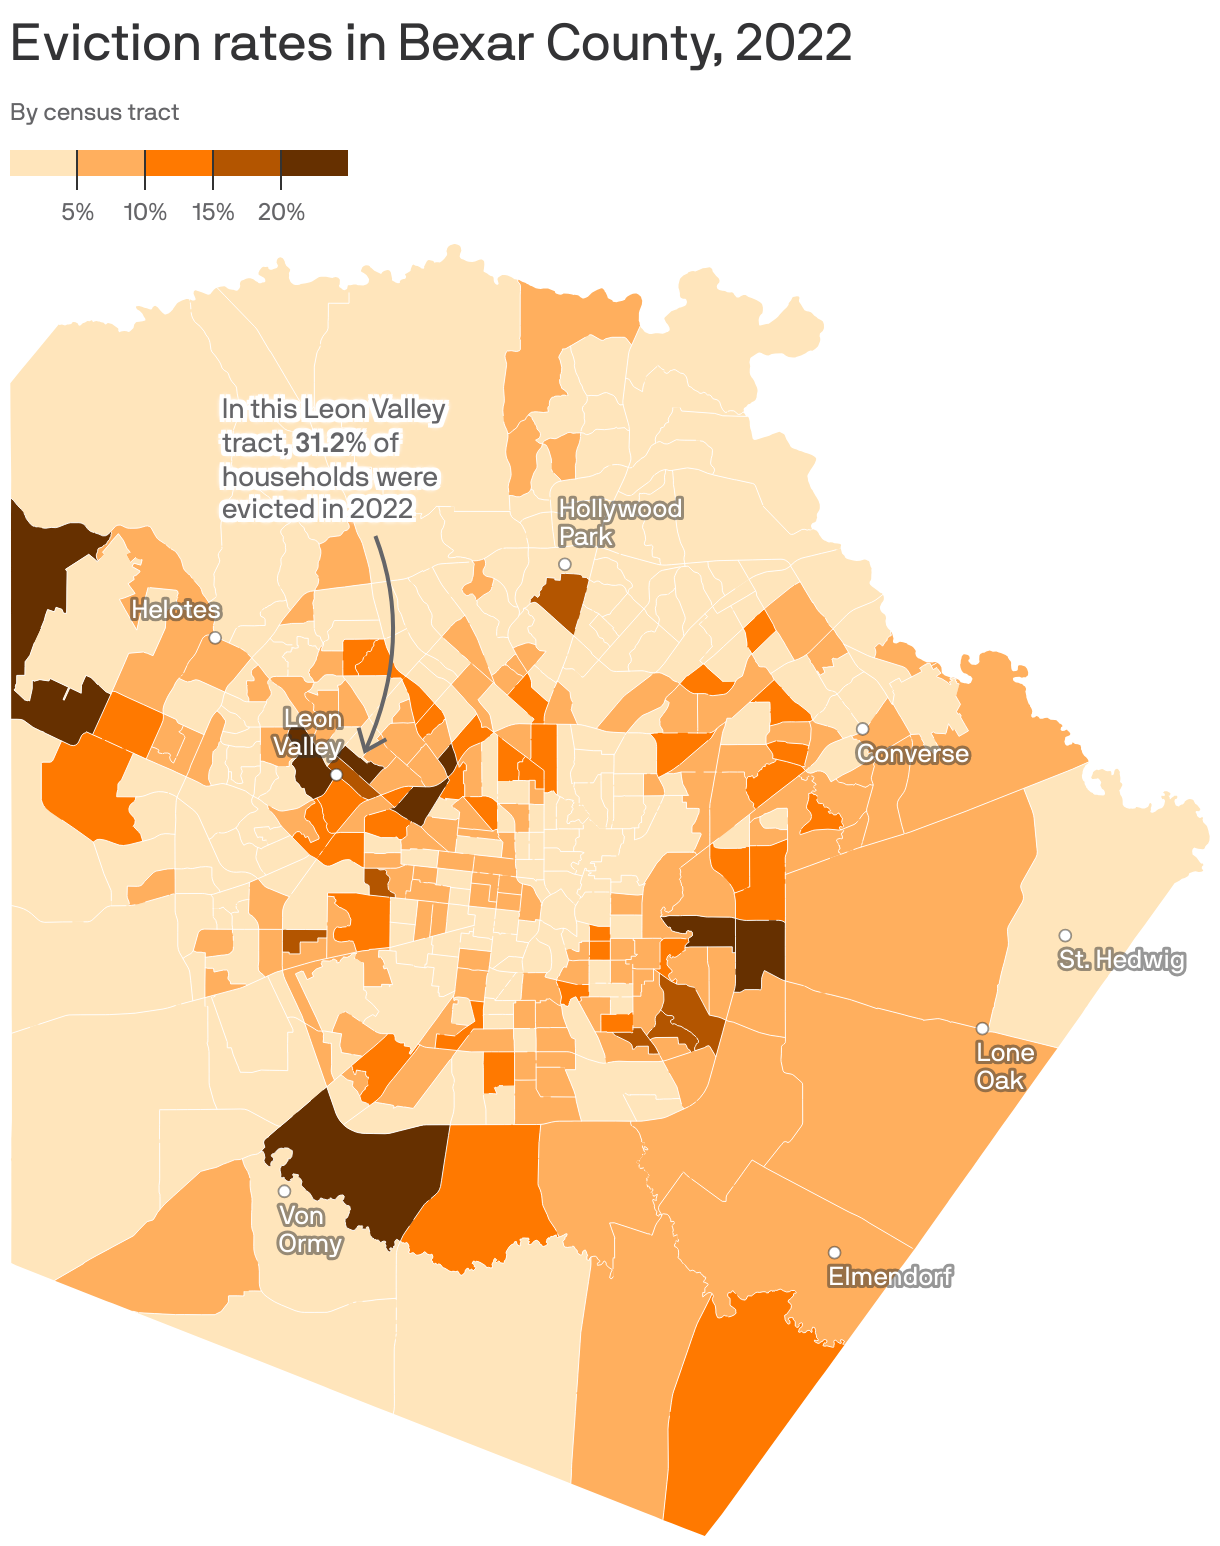 Eviction rates in Bexar County, 2022